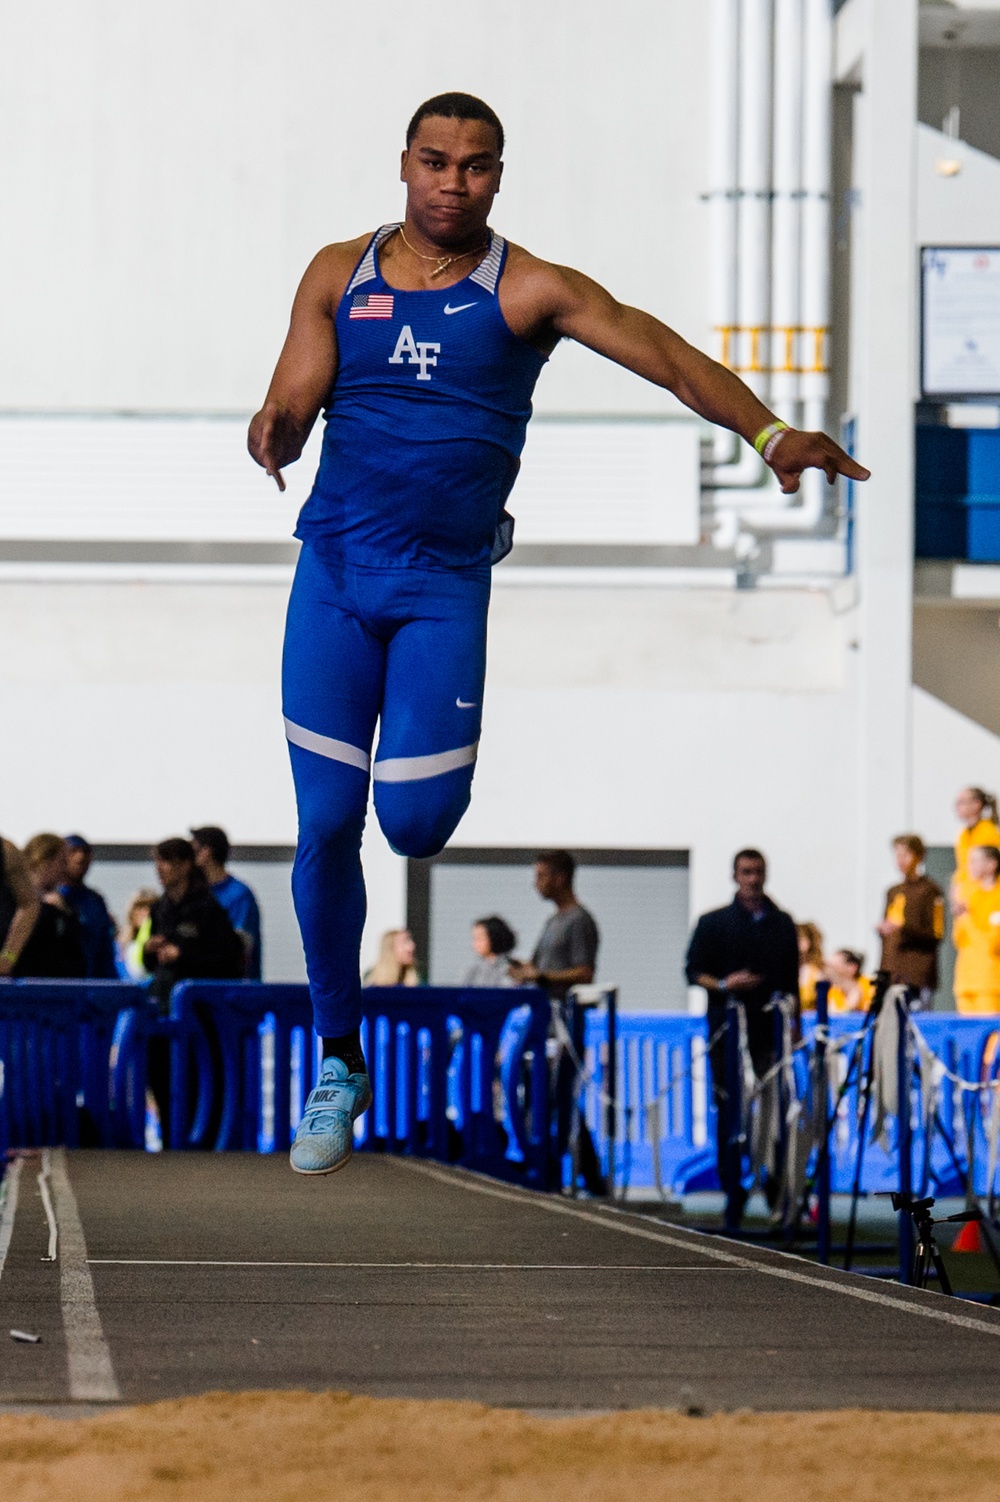 U.S. Air Force Academy Track and Field Meet